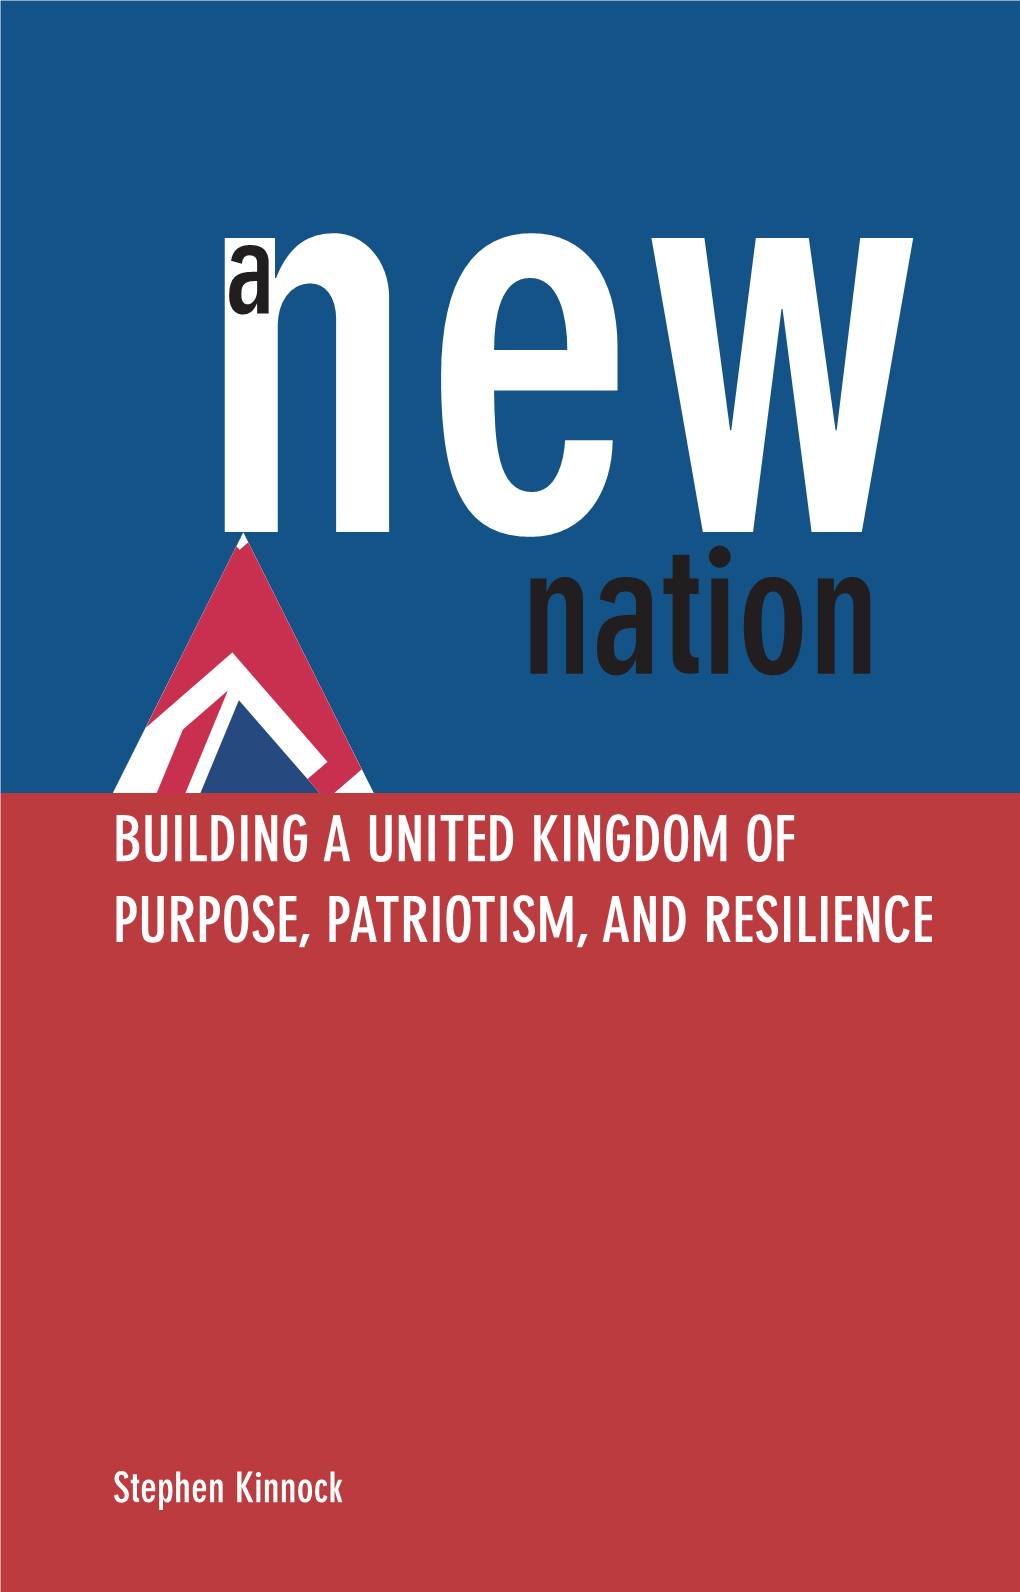 Building a United Kingdom of Purpose, Patriotism, and Resilience